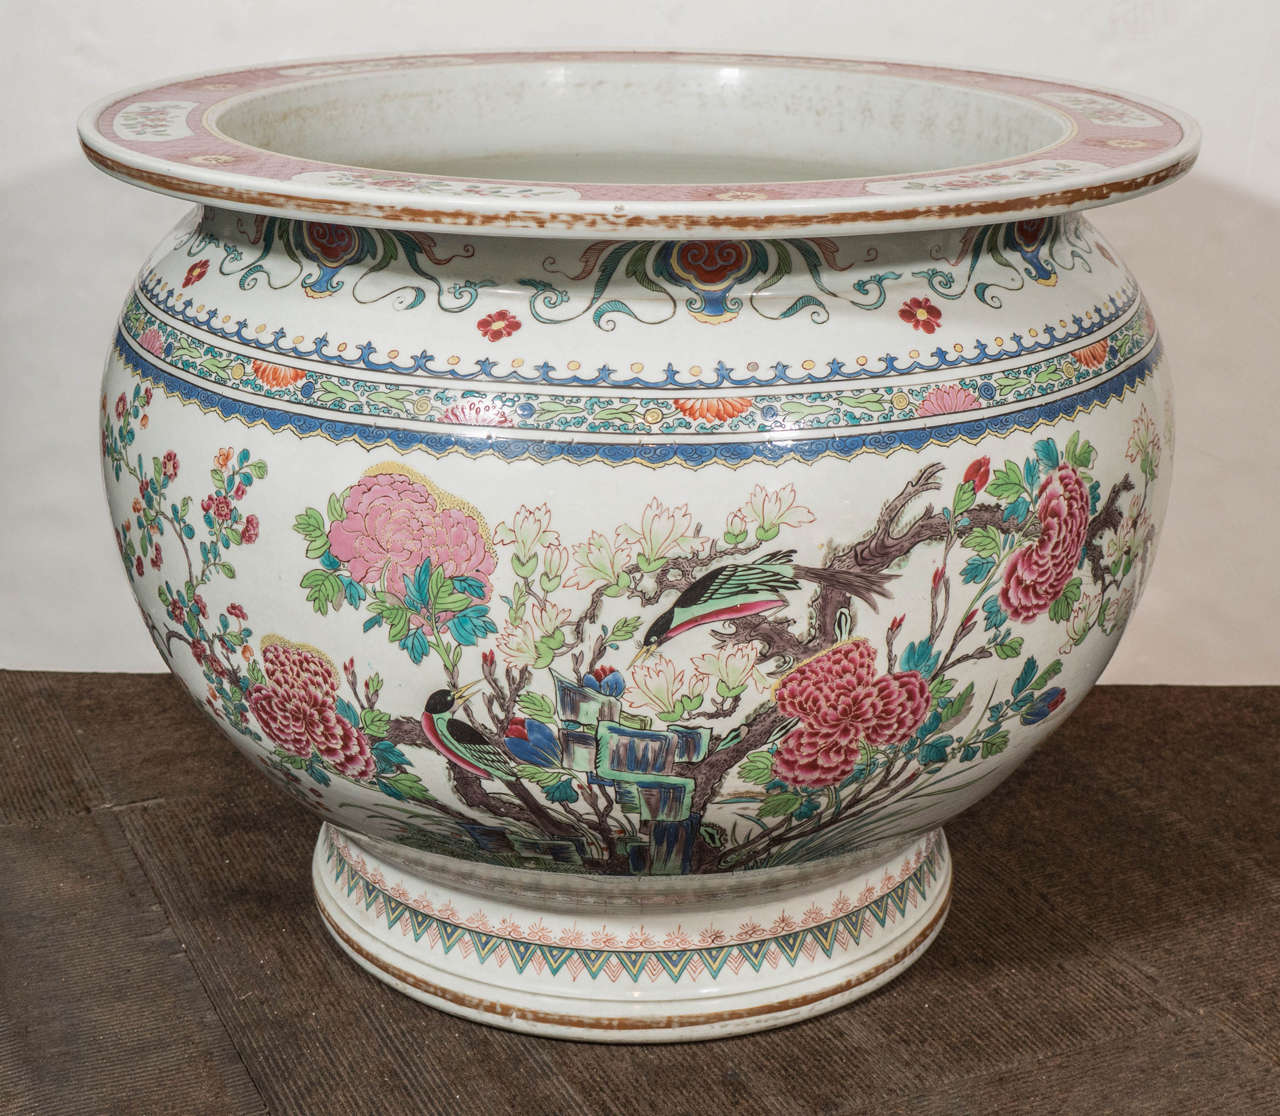 Well painted all around in bright Famille Rose enamels showing a pair of songbirds among blossoming flowers and rock work. On the reverse another pair of birds among chrysanthemums and other blooms.
The interior decorated with Chinese goldfish